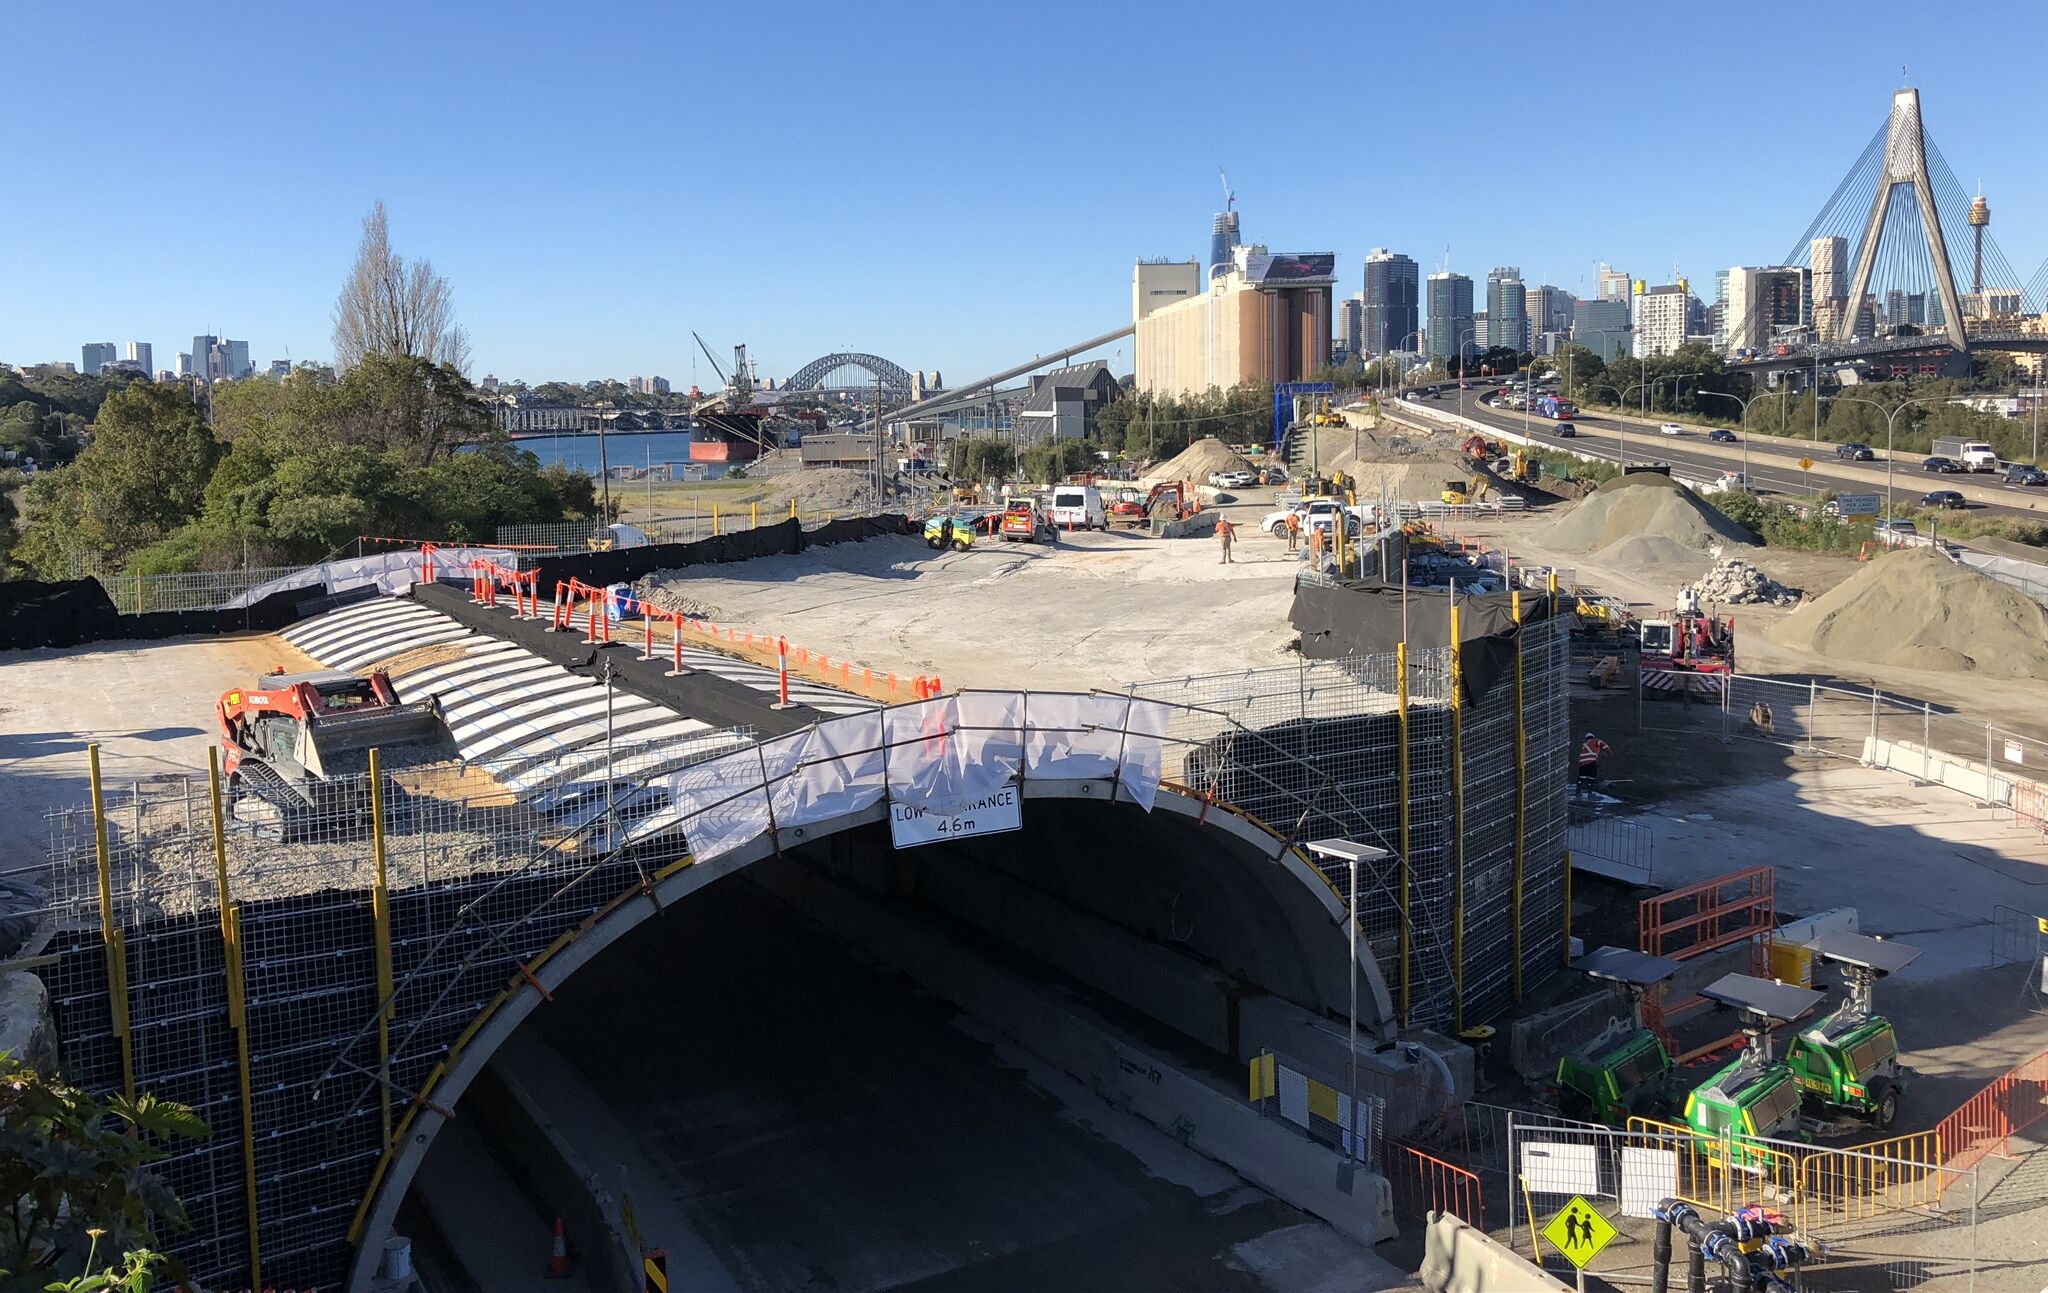 Precast concrete arch solution, TechSpan® by Reinforced Earth pictured in the foreground of the Sydney Harbour Bridge during the construction of the Rozelle Interchange in NSW